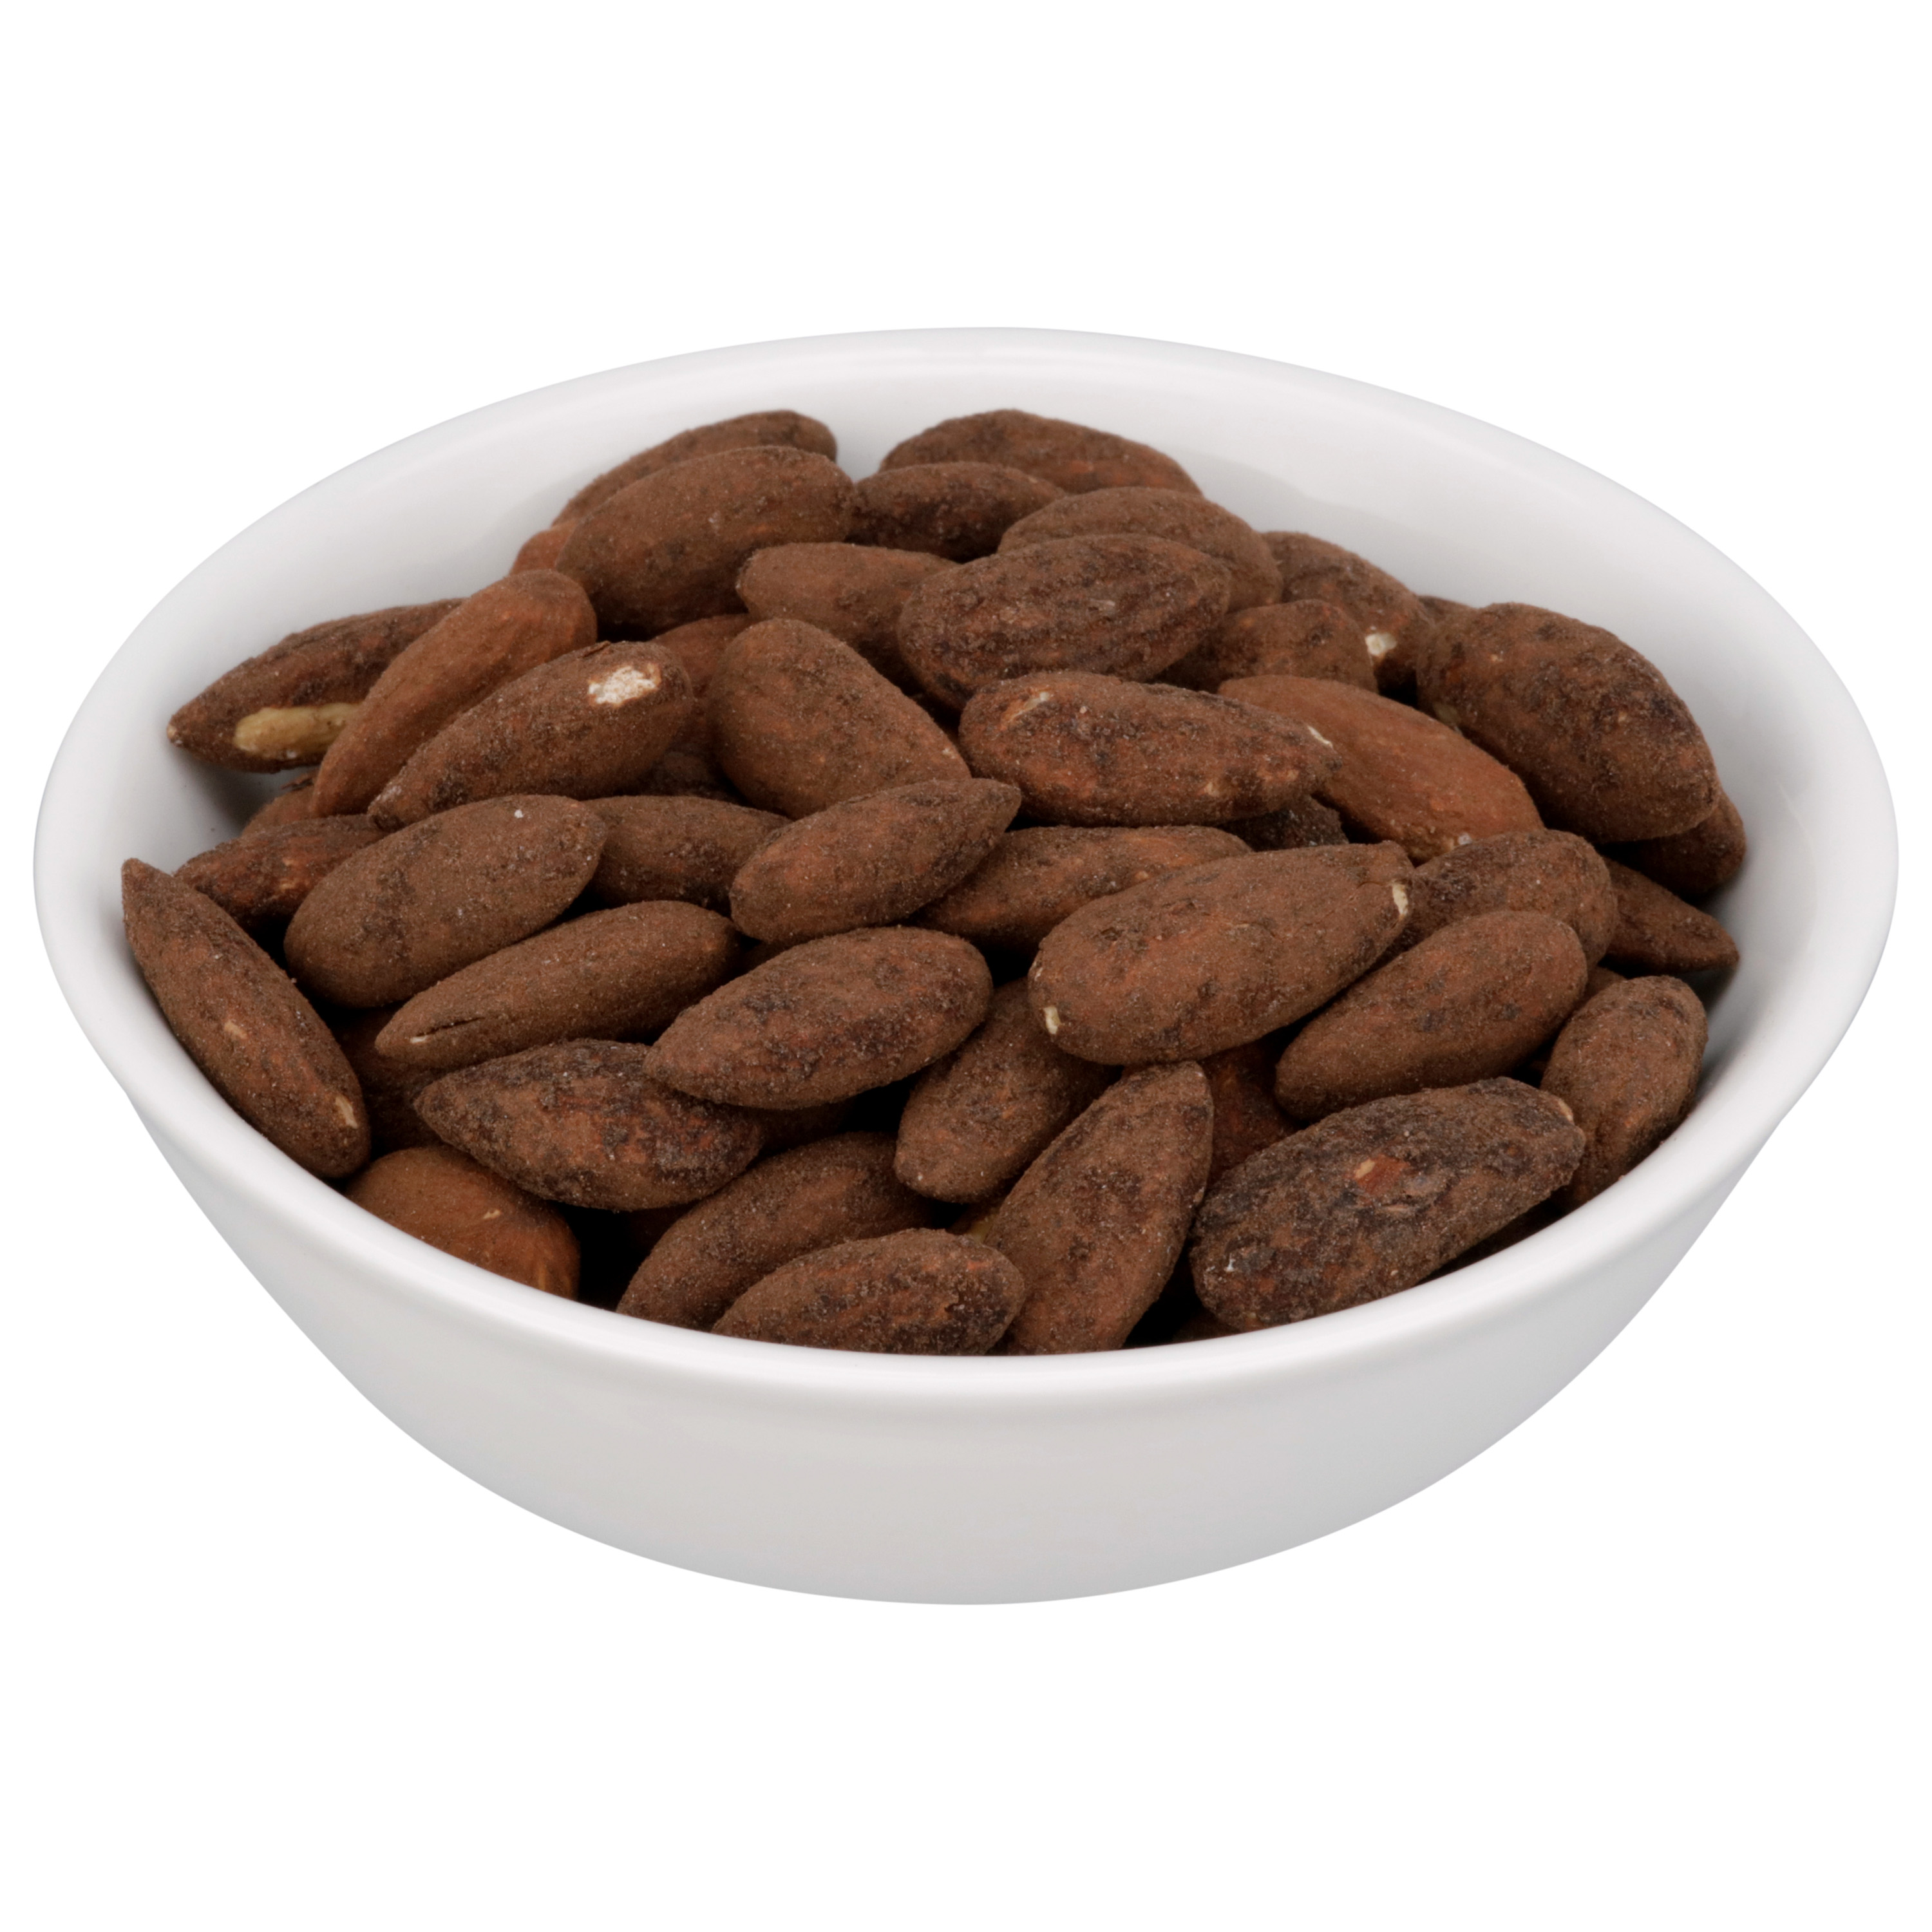 Emerald Nuts Cocoa Roast Almonds, 100 Calorie Packs, 7 Count, 4.34 oz - image 3 of 6